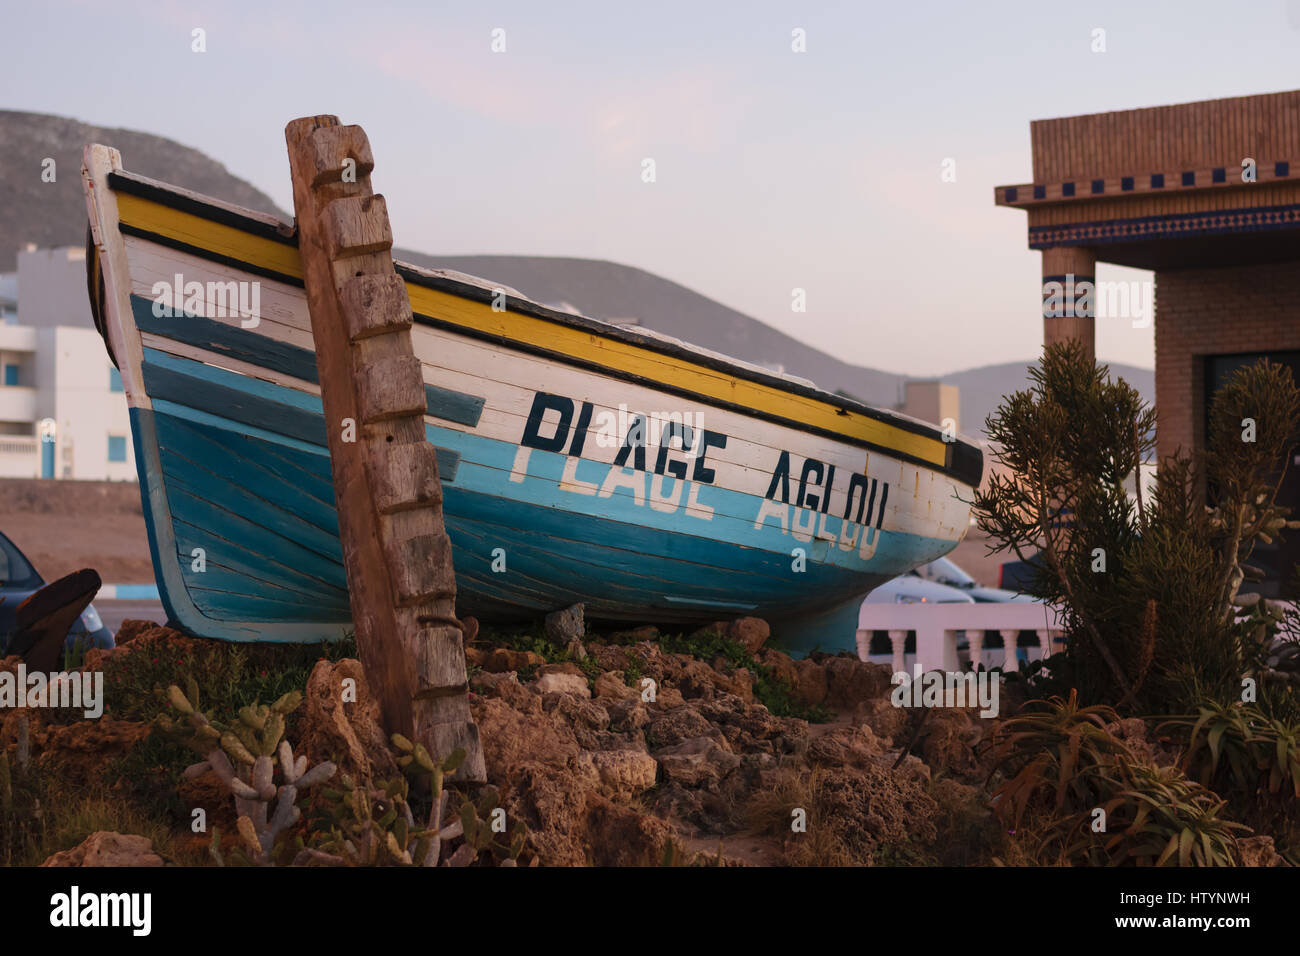 A boat a the entrance to the beach of Aglou in Morocco wiht the words Aglou Plage written on it. Stock Photo